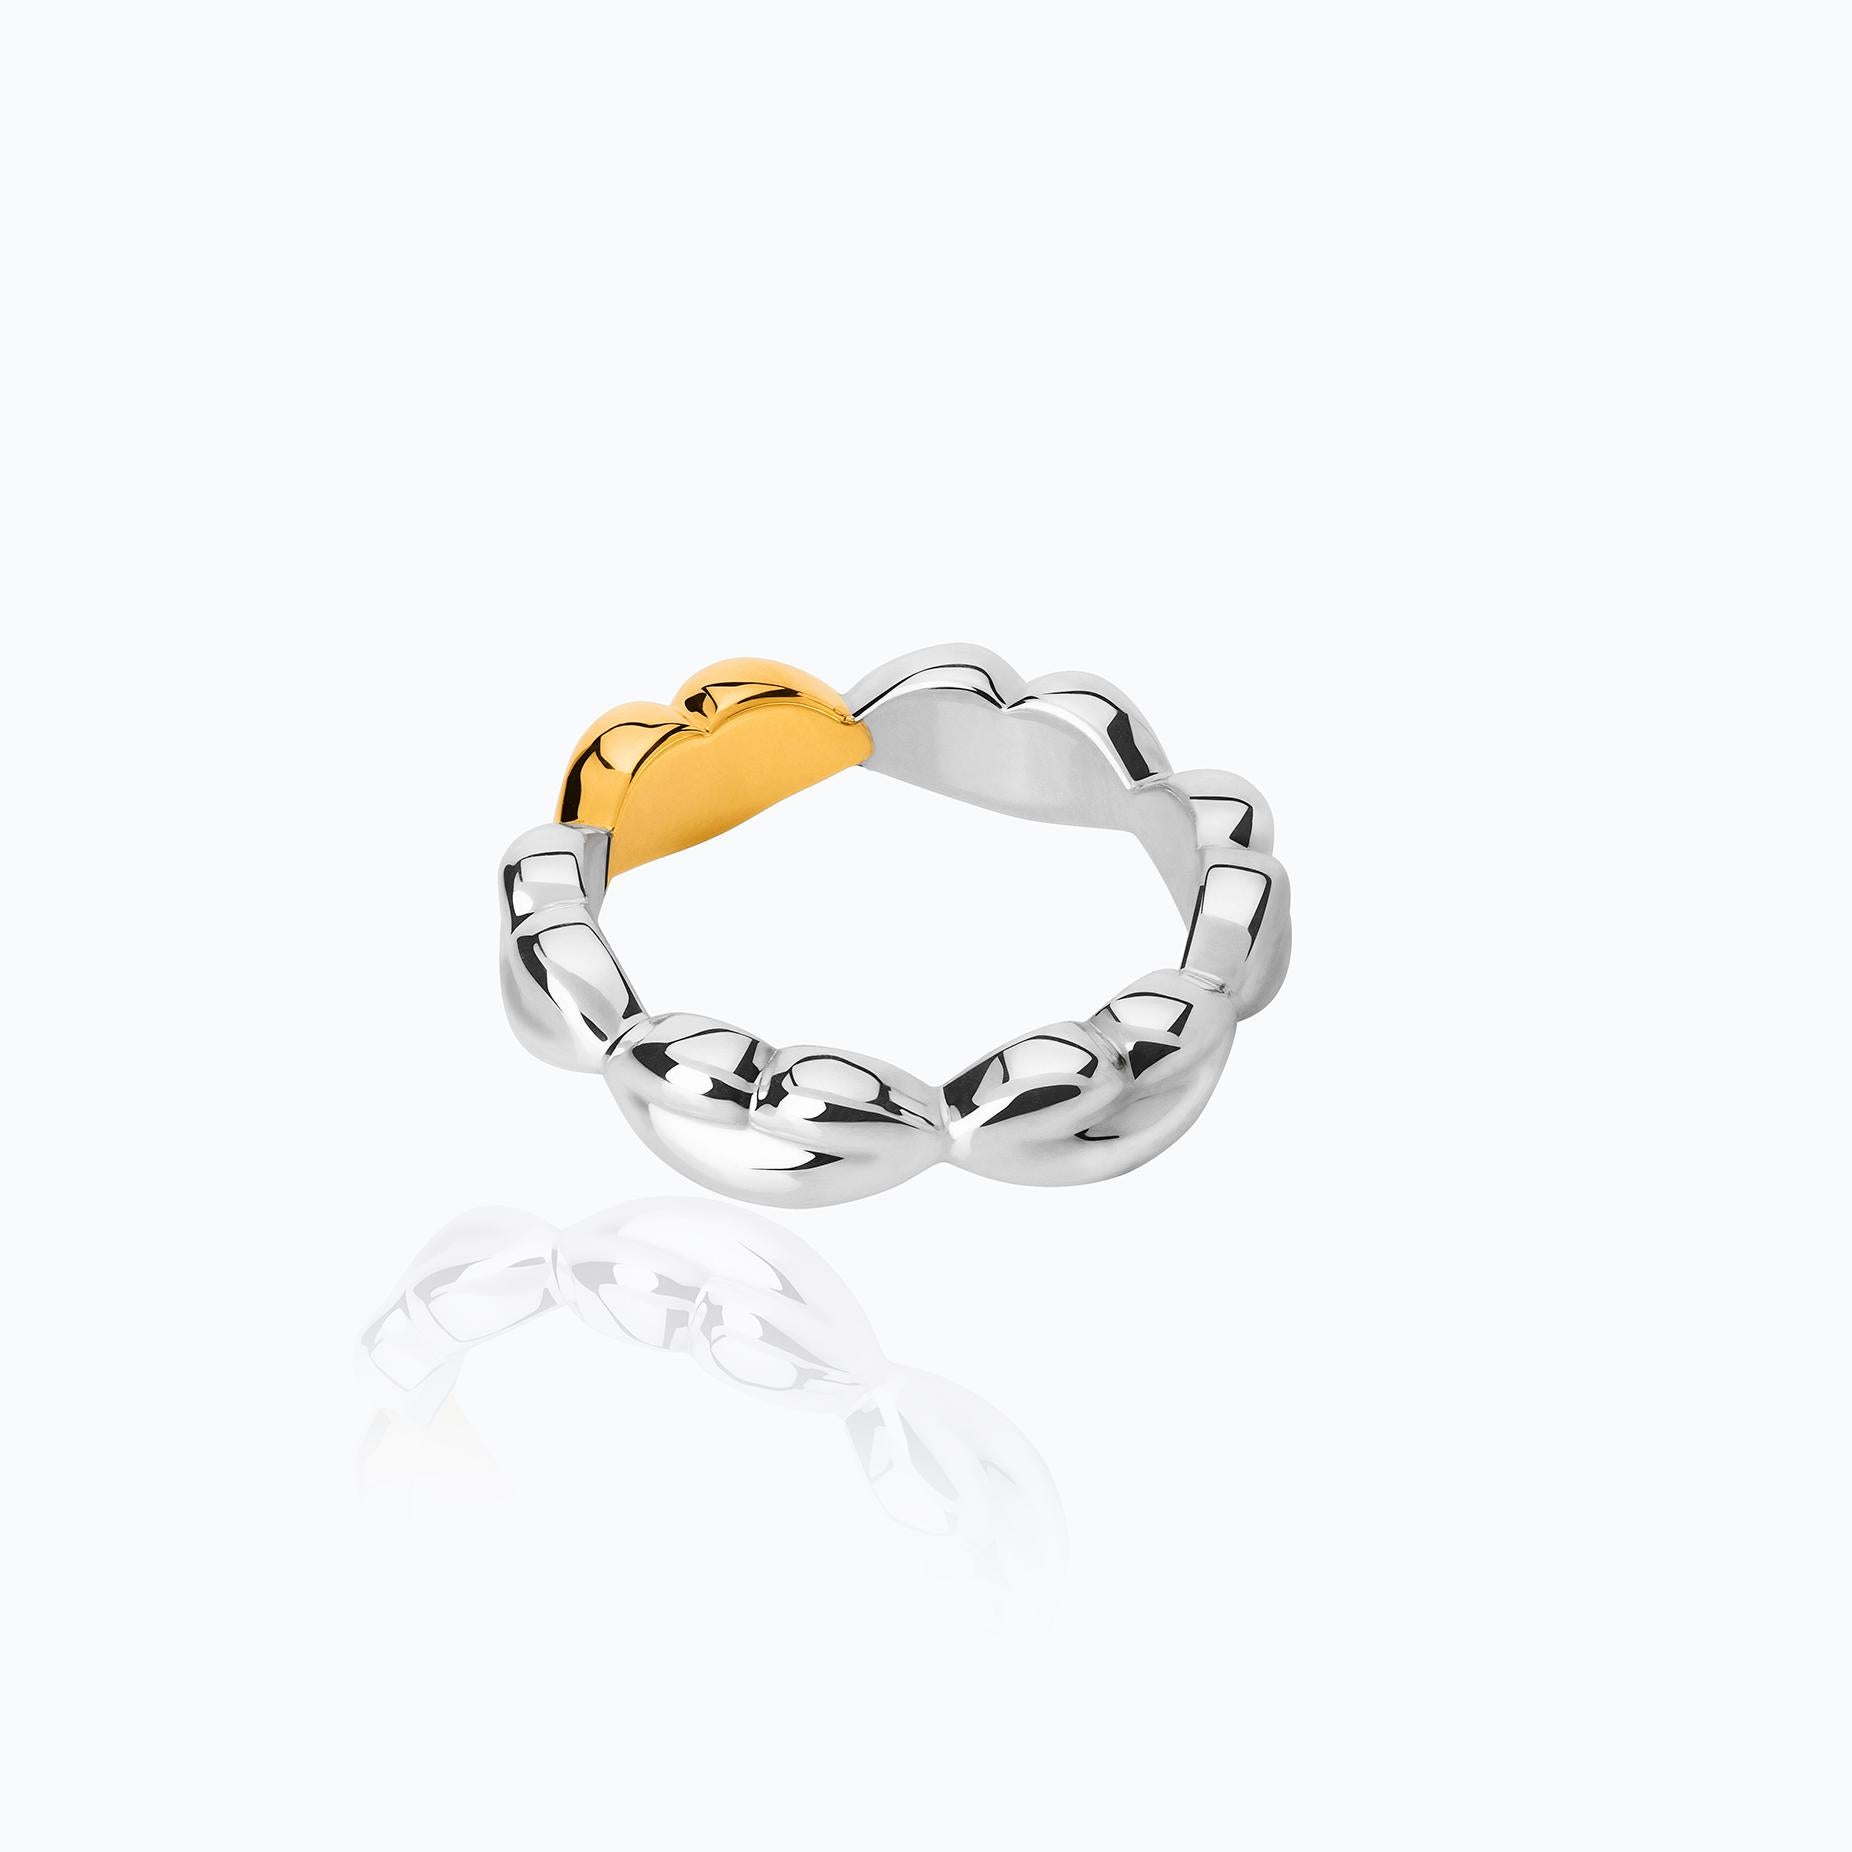 Sterling Silver With 23 Karat Yellow Gold Vermeil Bésame Texture Ring - Size 55 In New Condition For Sale In Mexico City, MX